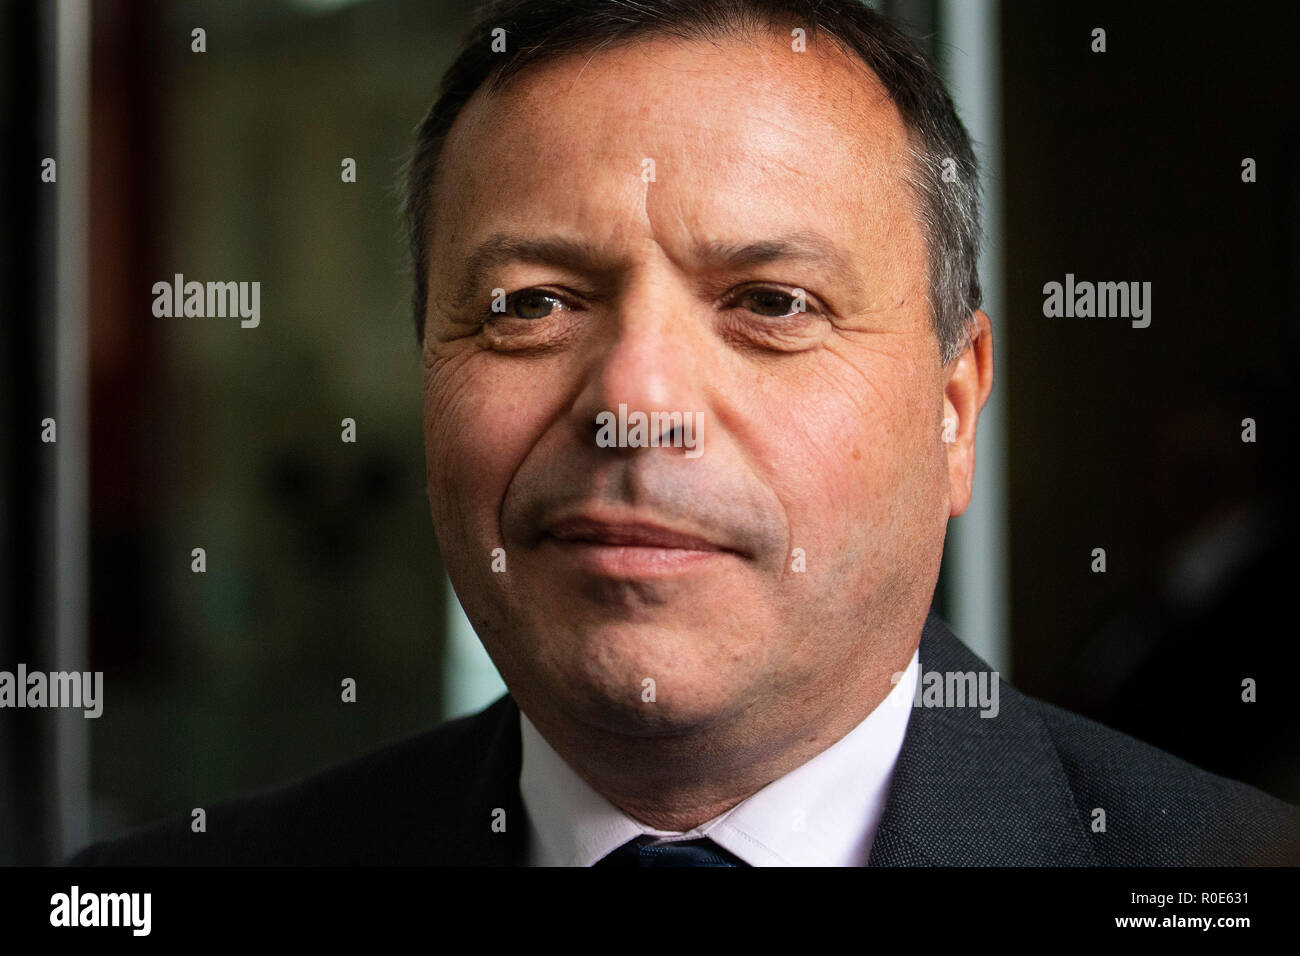 Leave campaigner Arron Banks, who is being investigated by the National Crime Agency for 'suspected criminal offences' committed during the Brexit referendum, arrives at the BBC Broadcasting House in London to appear on the Andrew Marr show. Stock Photo